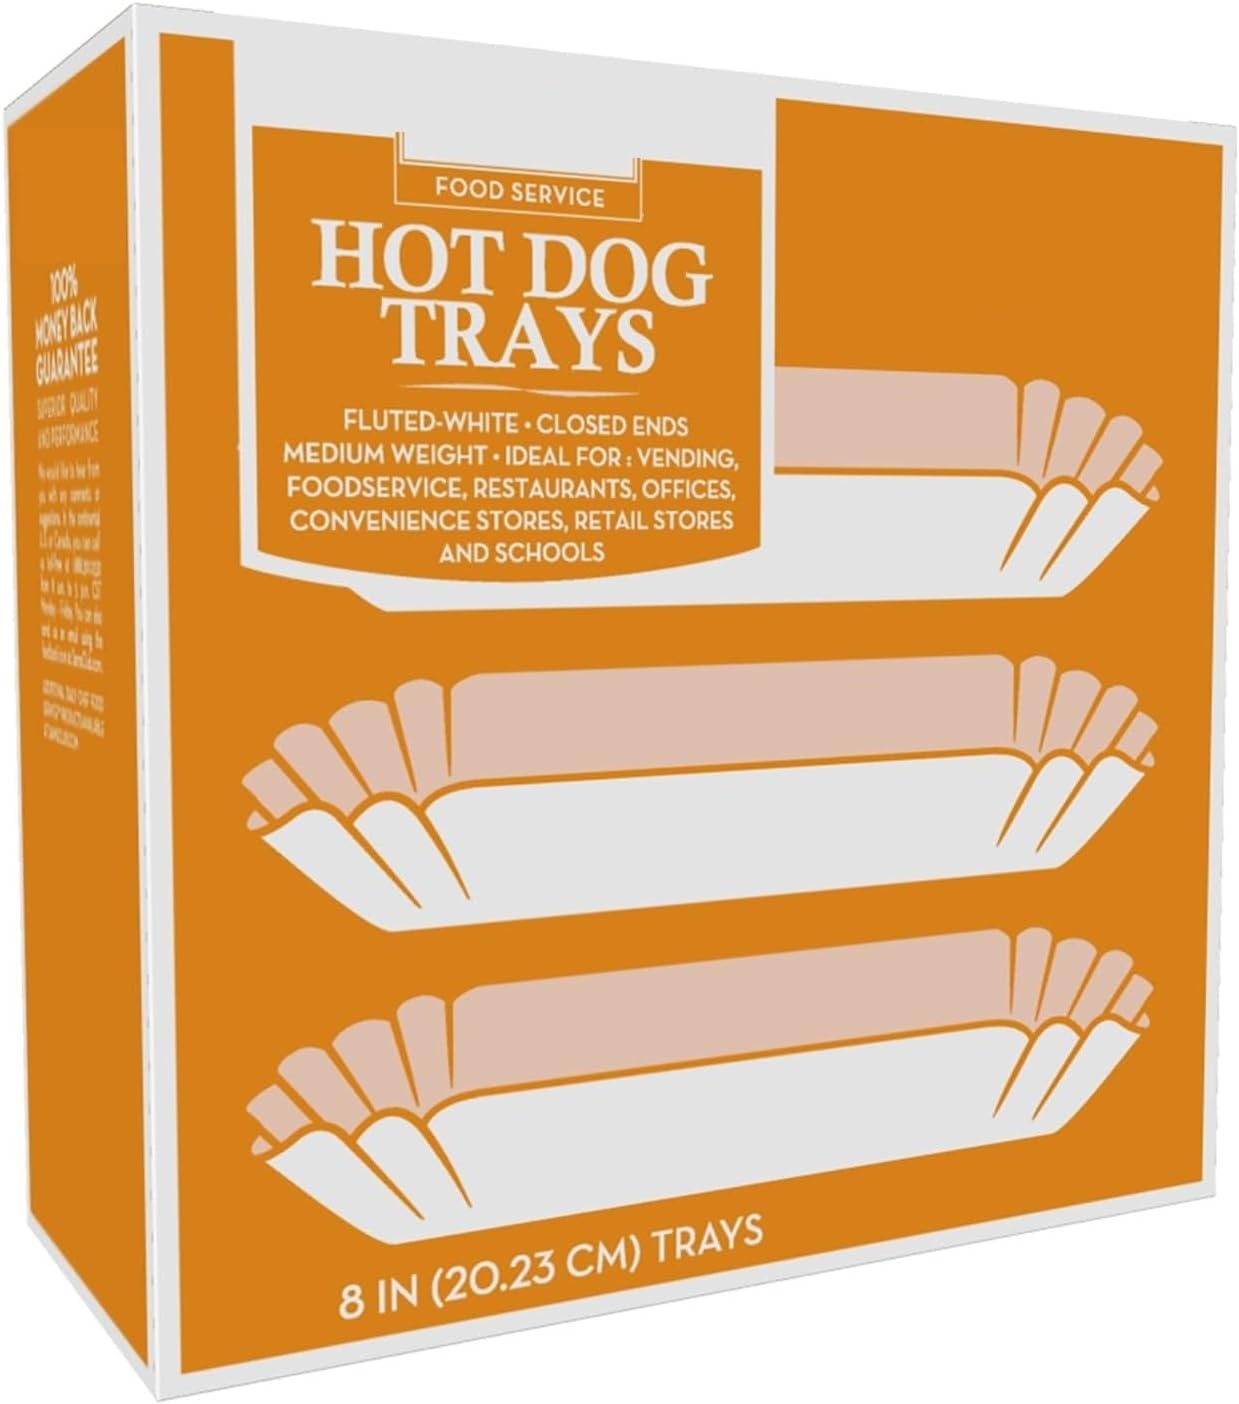 1500 Paper Hot Dog Trays | White Hot Dog Wrappers | 8 Inch Hotdog Tray Holders Plates | Disposable Fluted Hotdog Boats | Hotdog Container - Concession Stand Trays - Hot Dog Cart Accessories